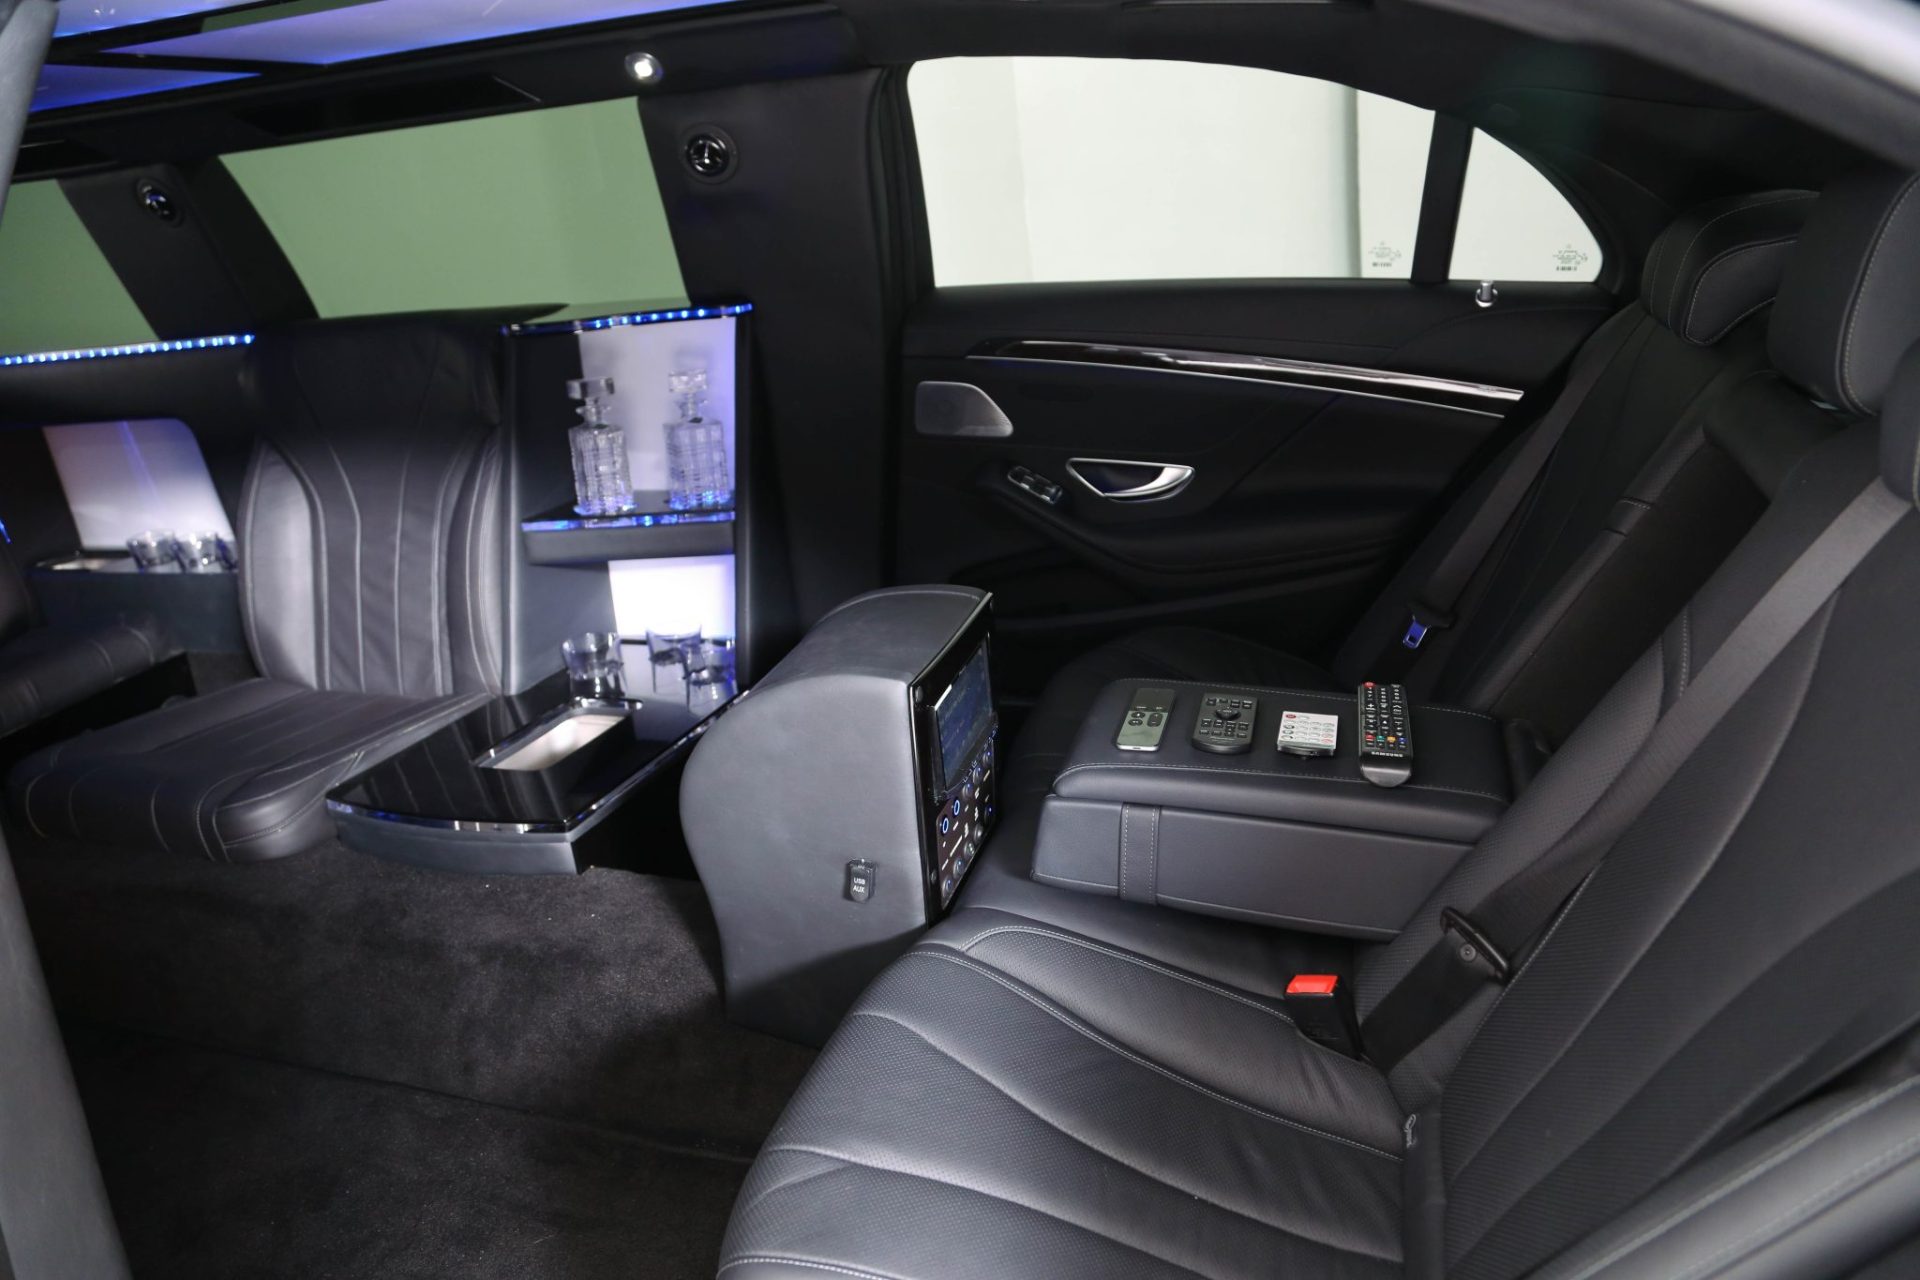 Mercedes Benz S-Class Stretched Limousine - Interior Photo #9